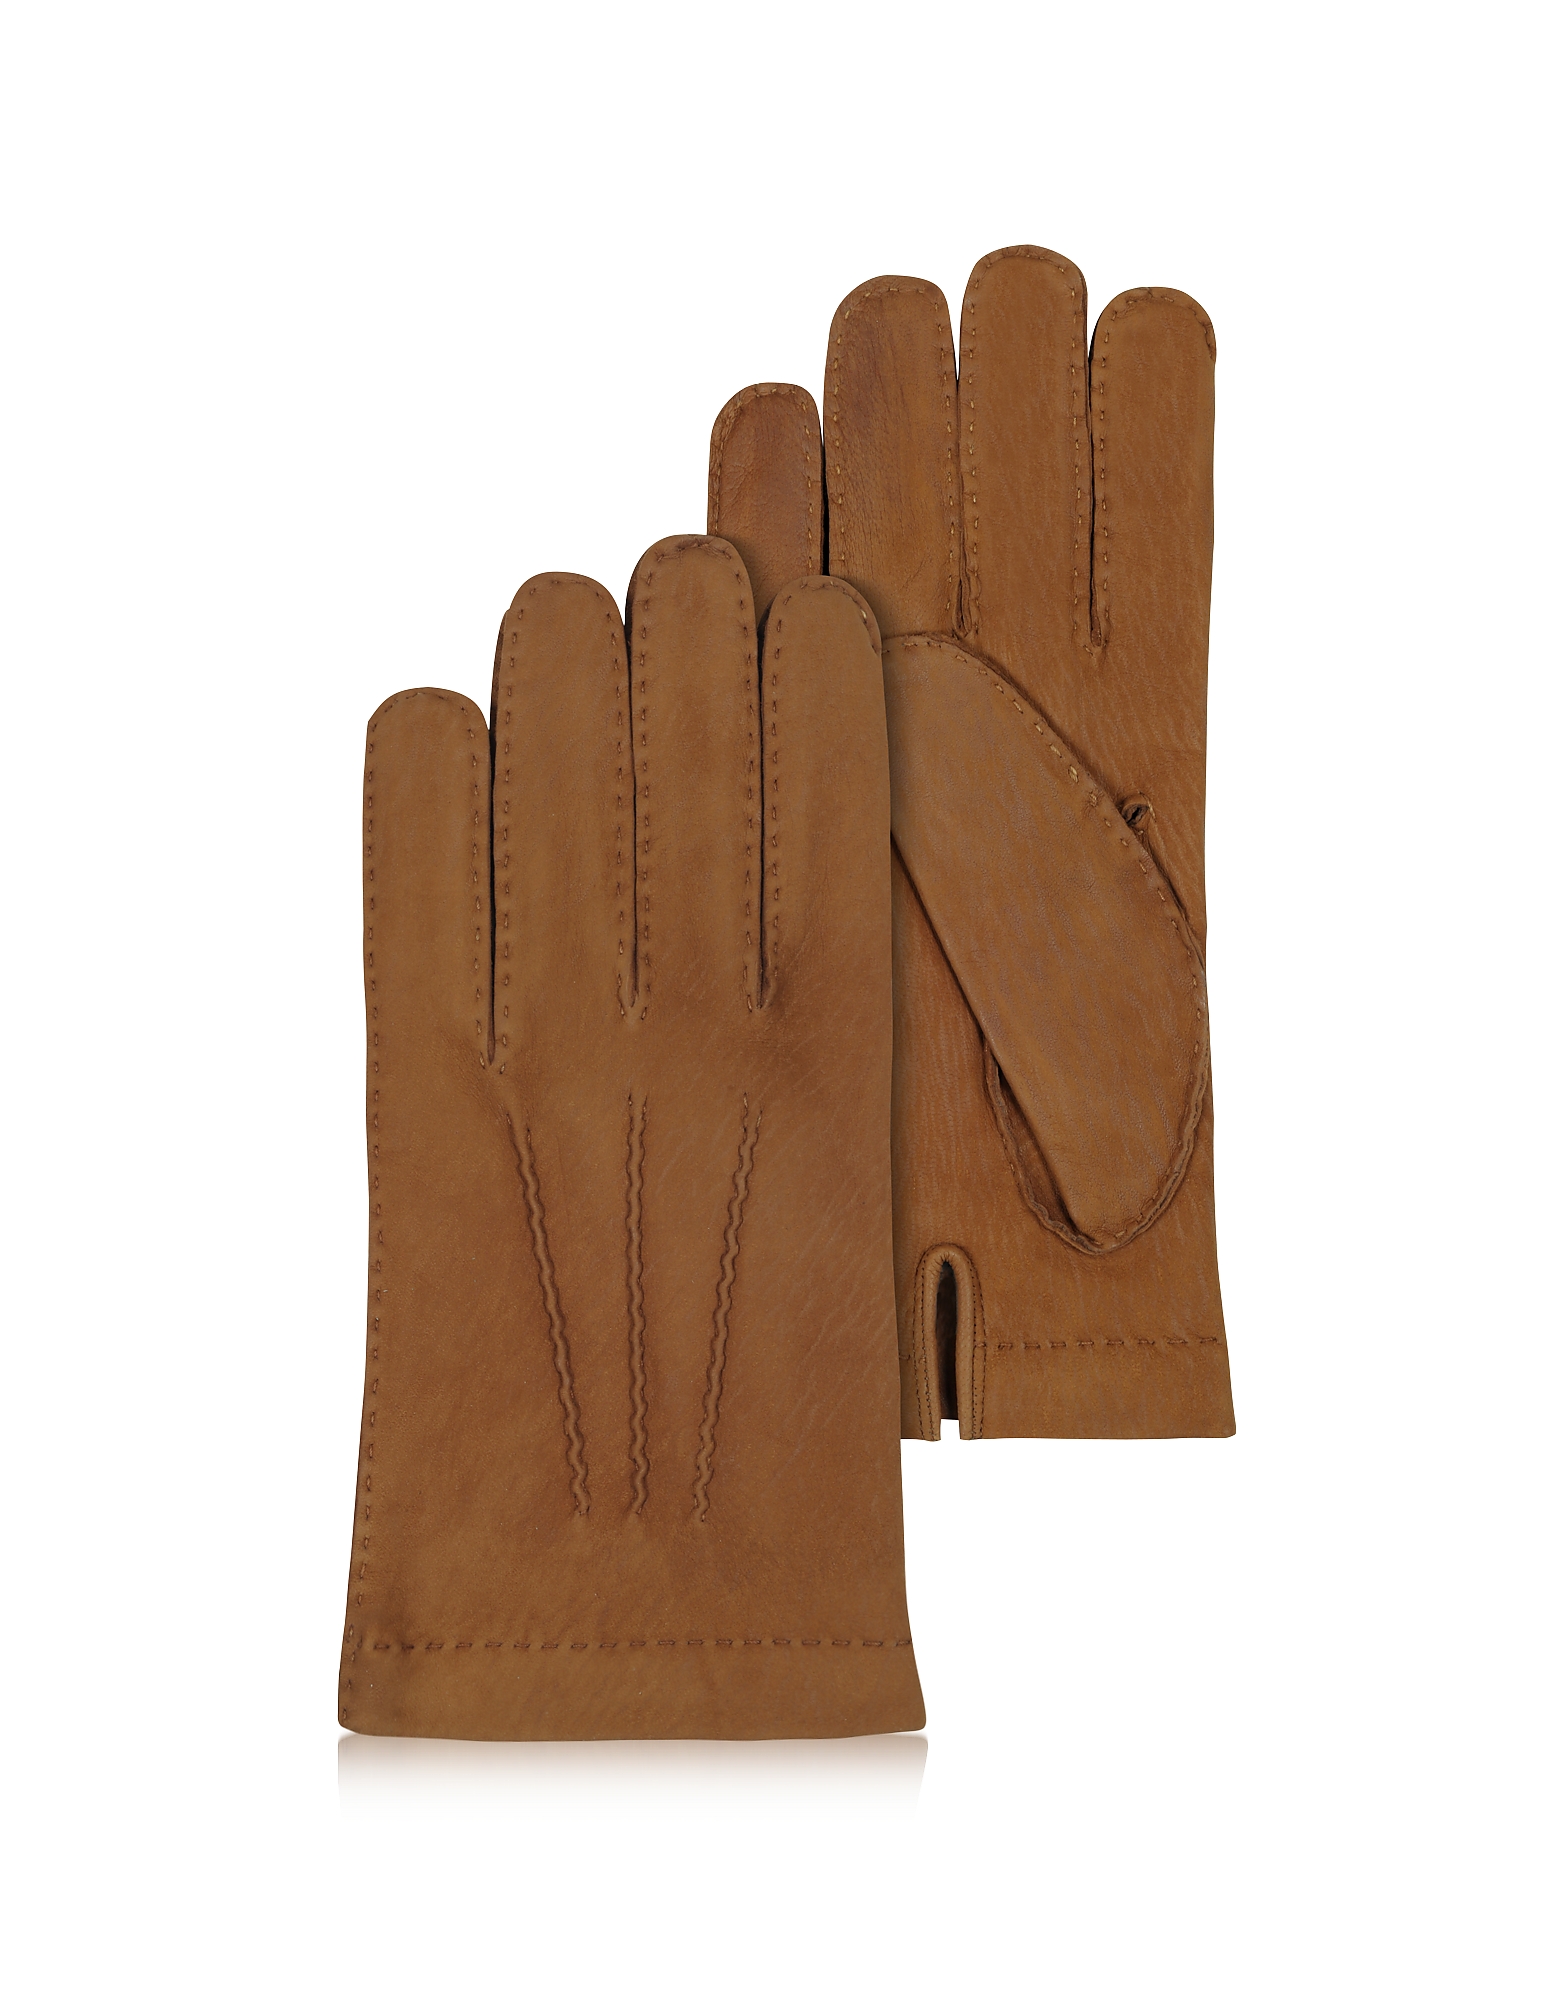 Forzieri Men's Gloves Men's Cashmere Lined Brown Italian Calf Leather Gloves